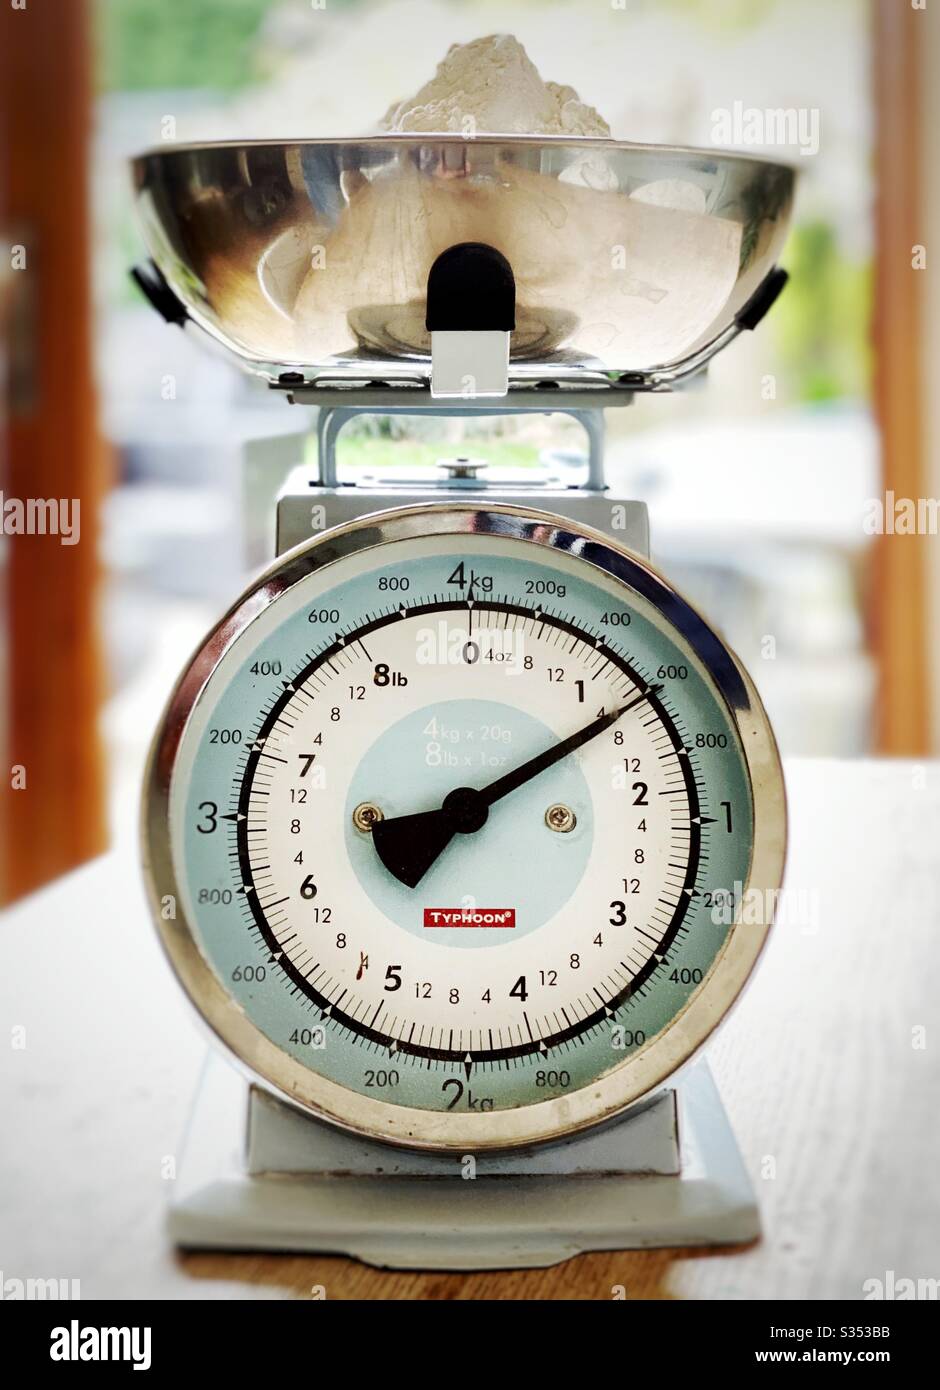 Bread flour in weighing scales Stock Photo - Alamy